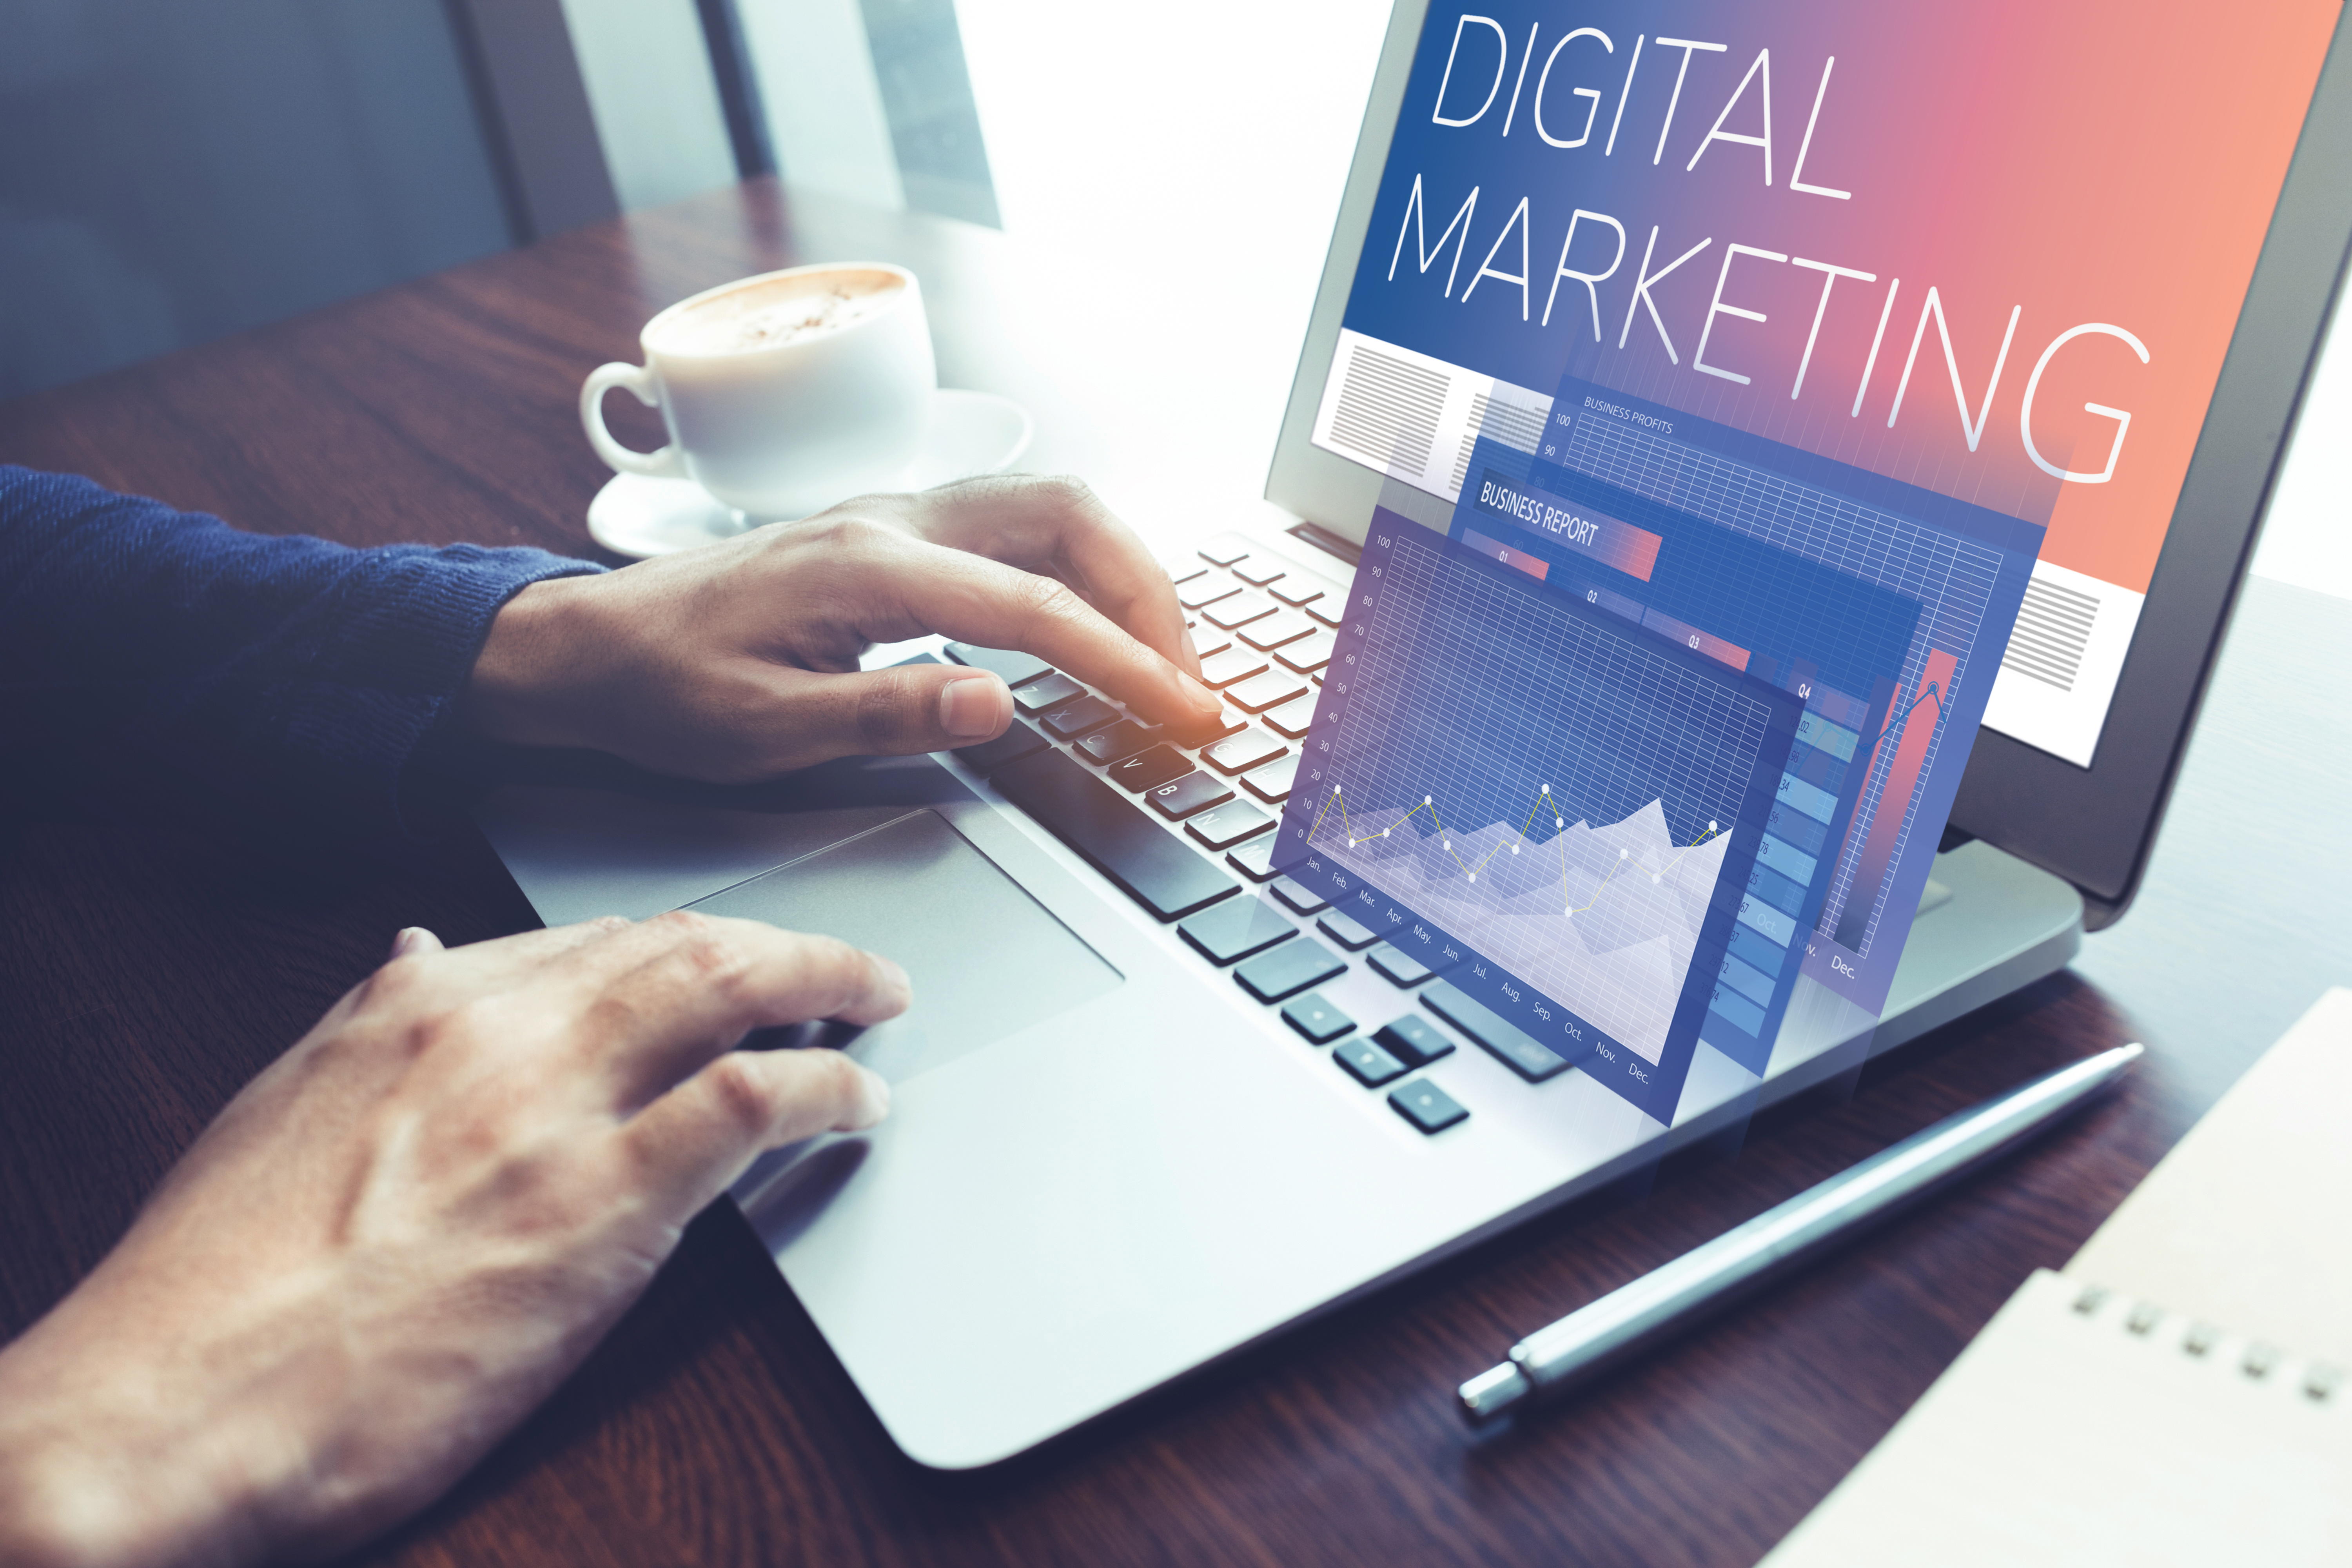 How To Make Money with Digital Marketing